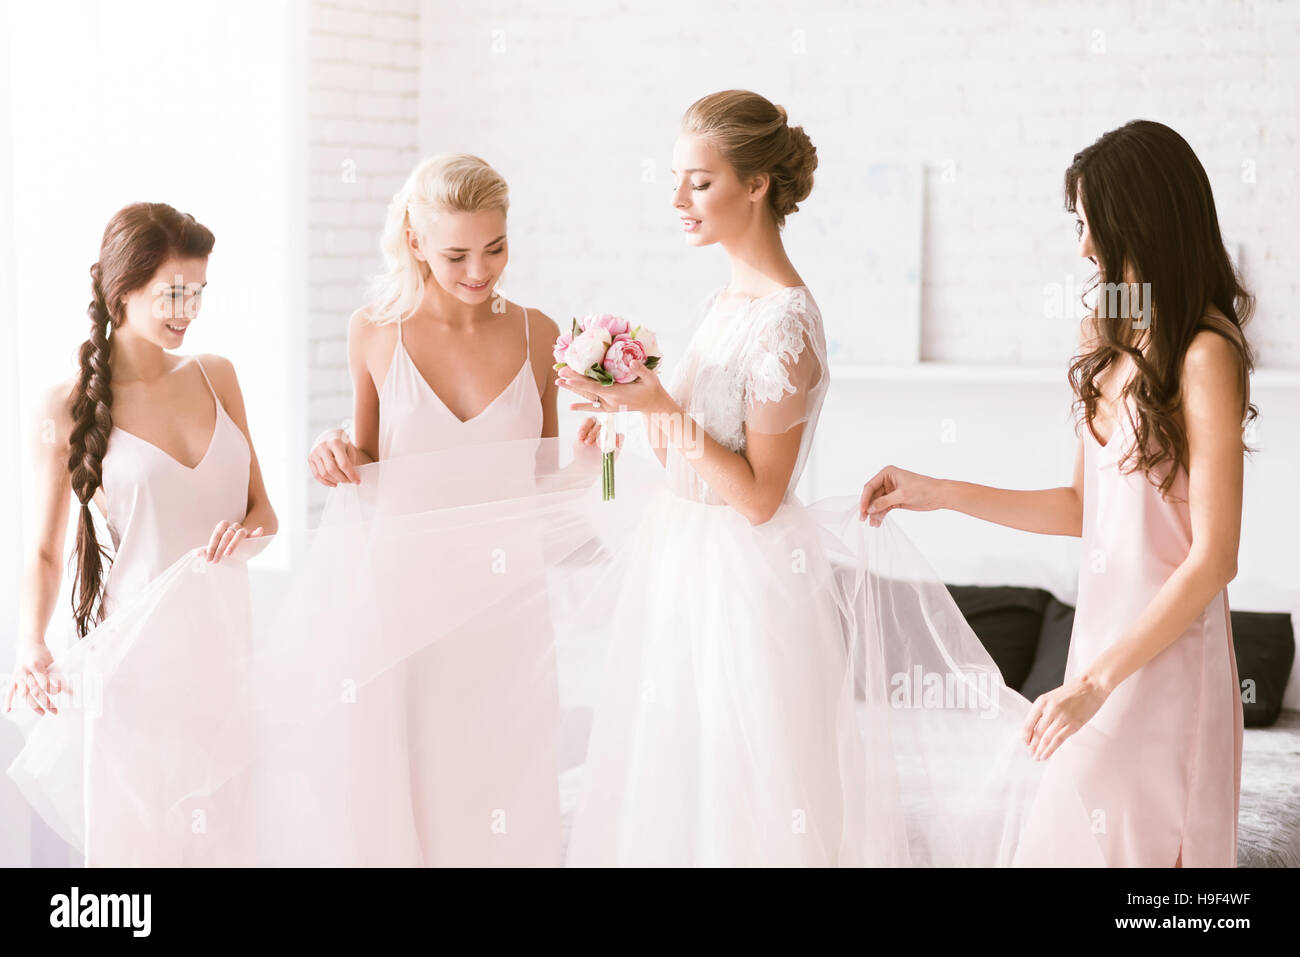 Amused bridesmaids touching the dress of the bride Stock Photo